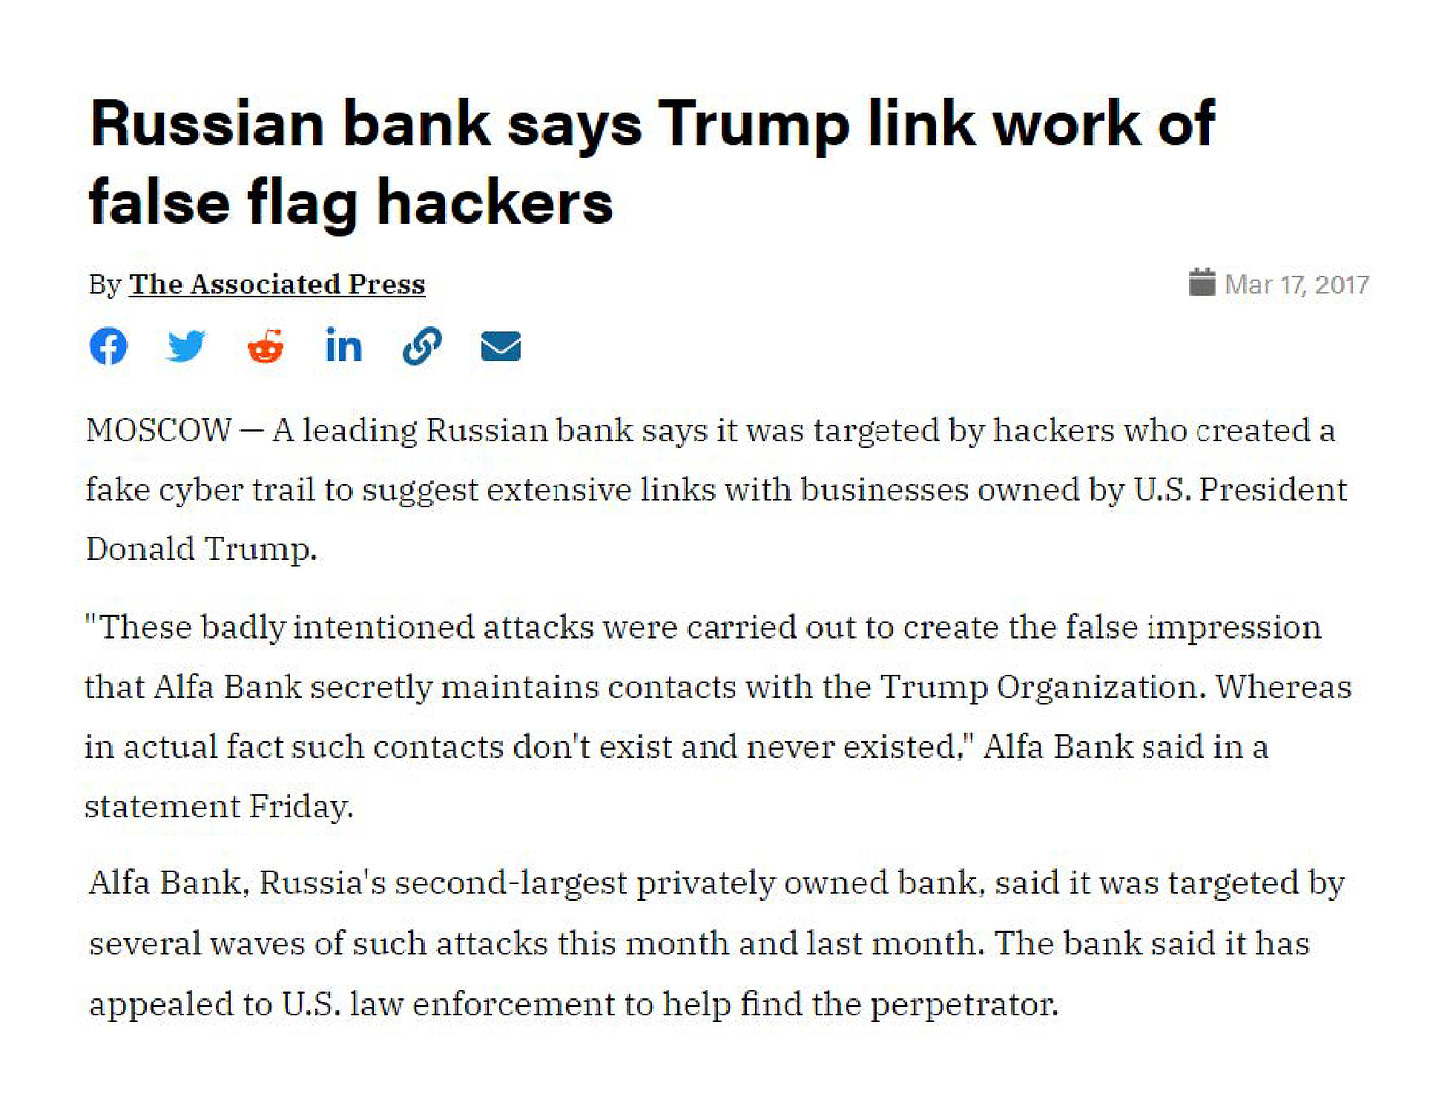 The Associated Press - Russian bank says Trump link work of false flag hackers